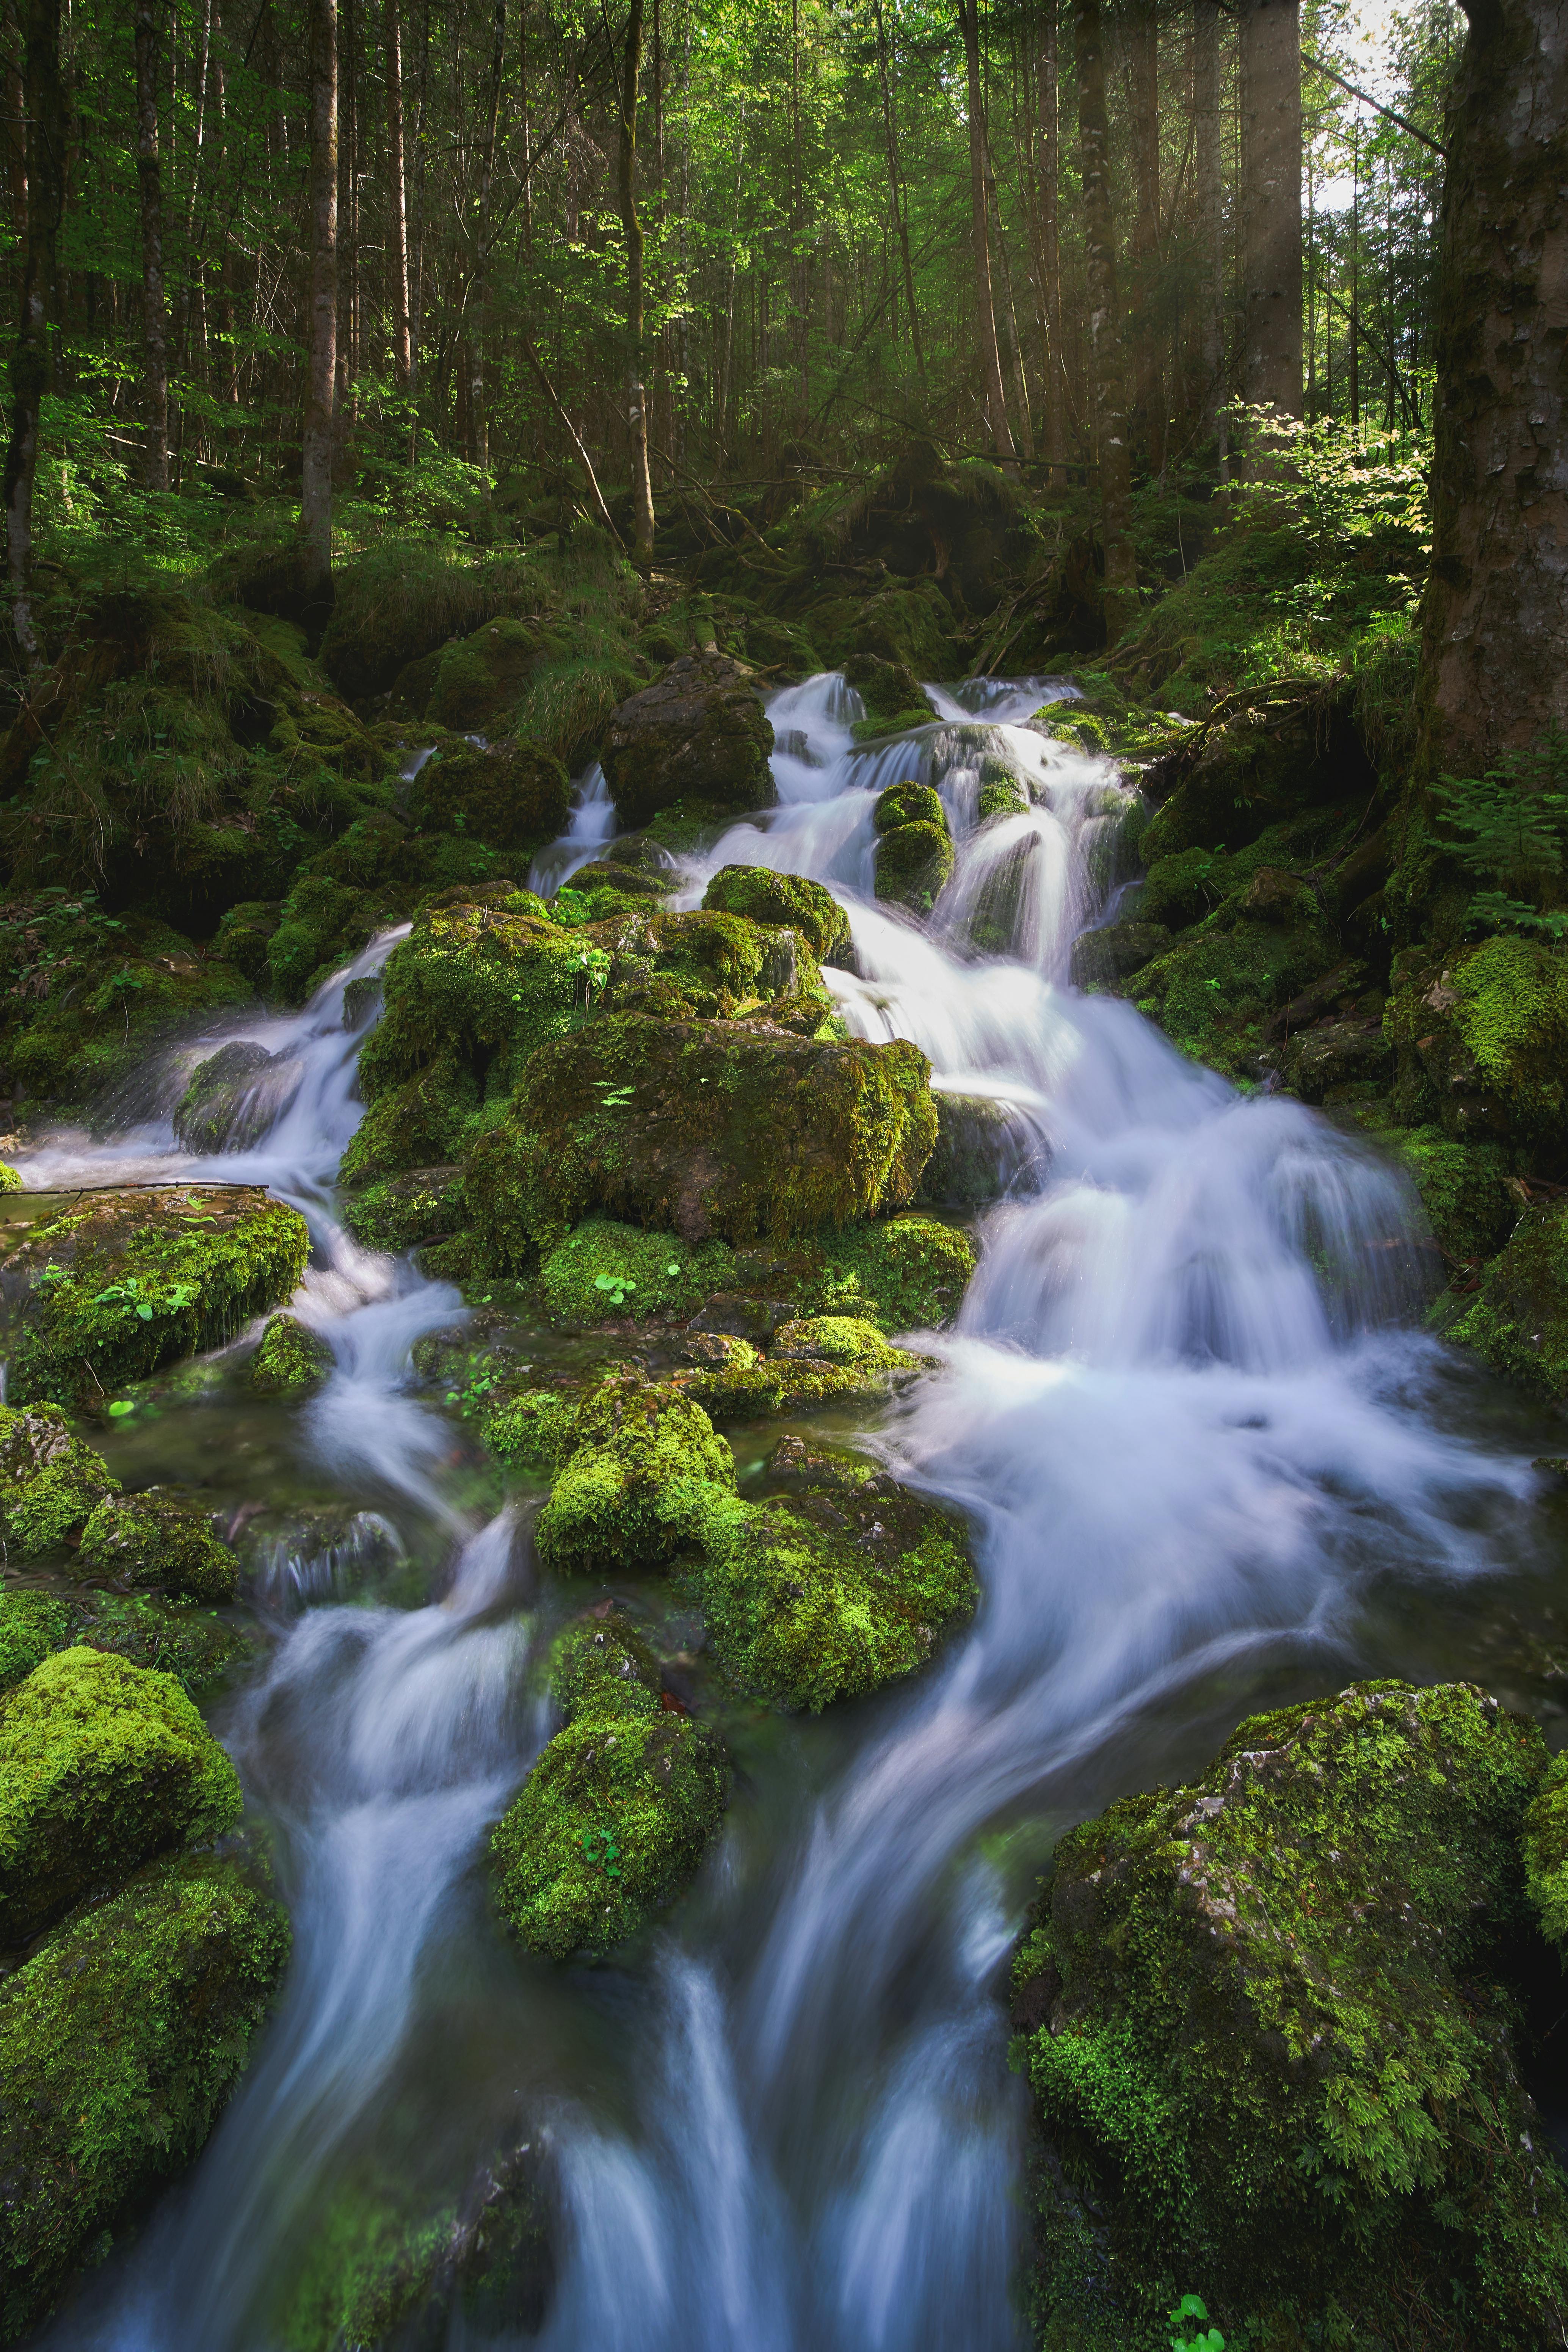 Water Flowing By Moss Covered Rocks In A Stream - PacificStock